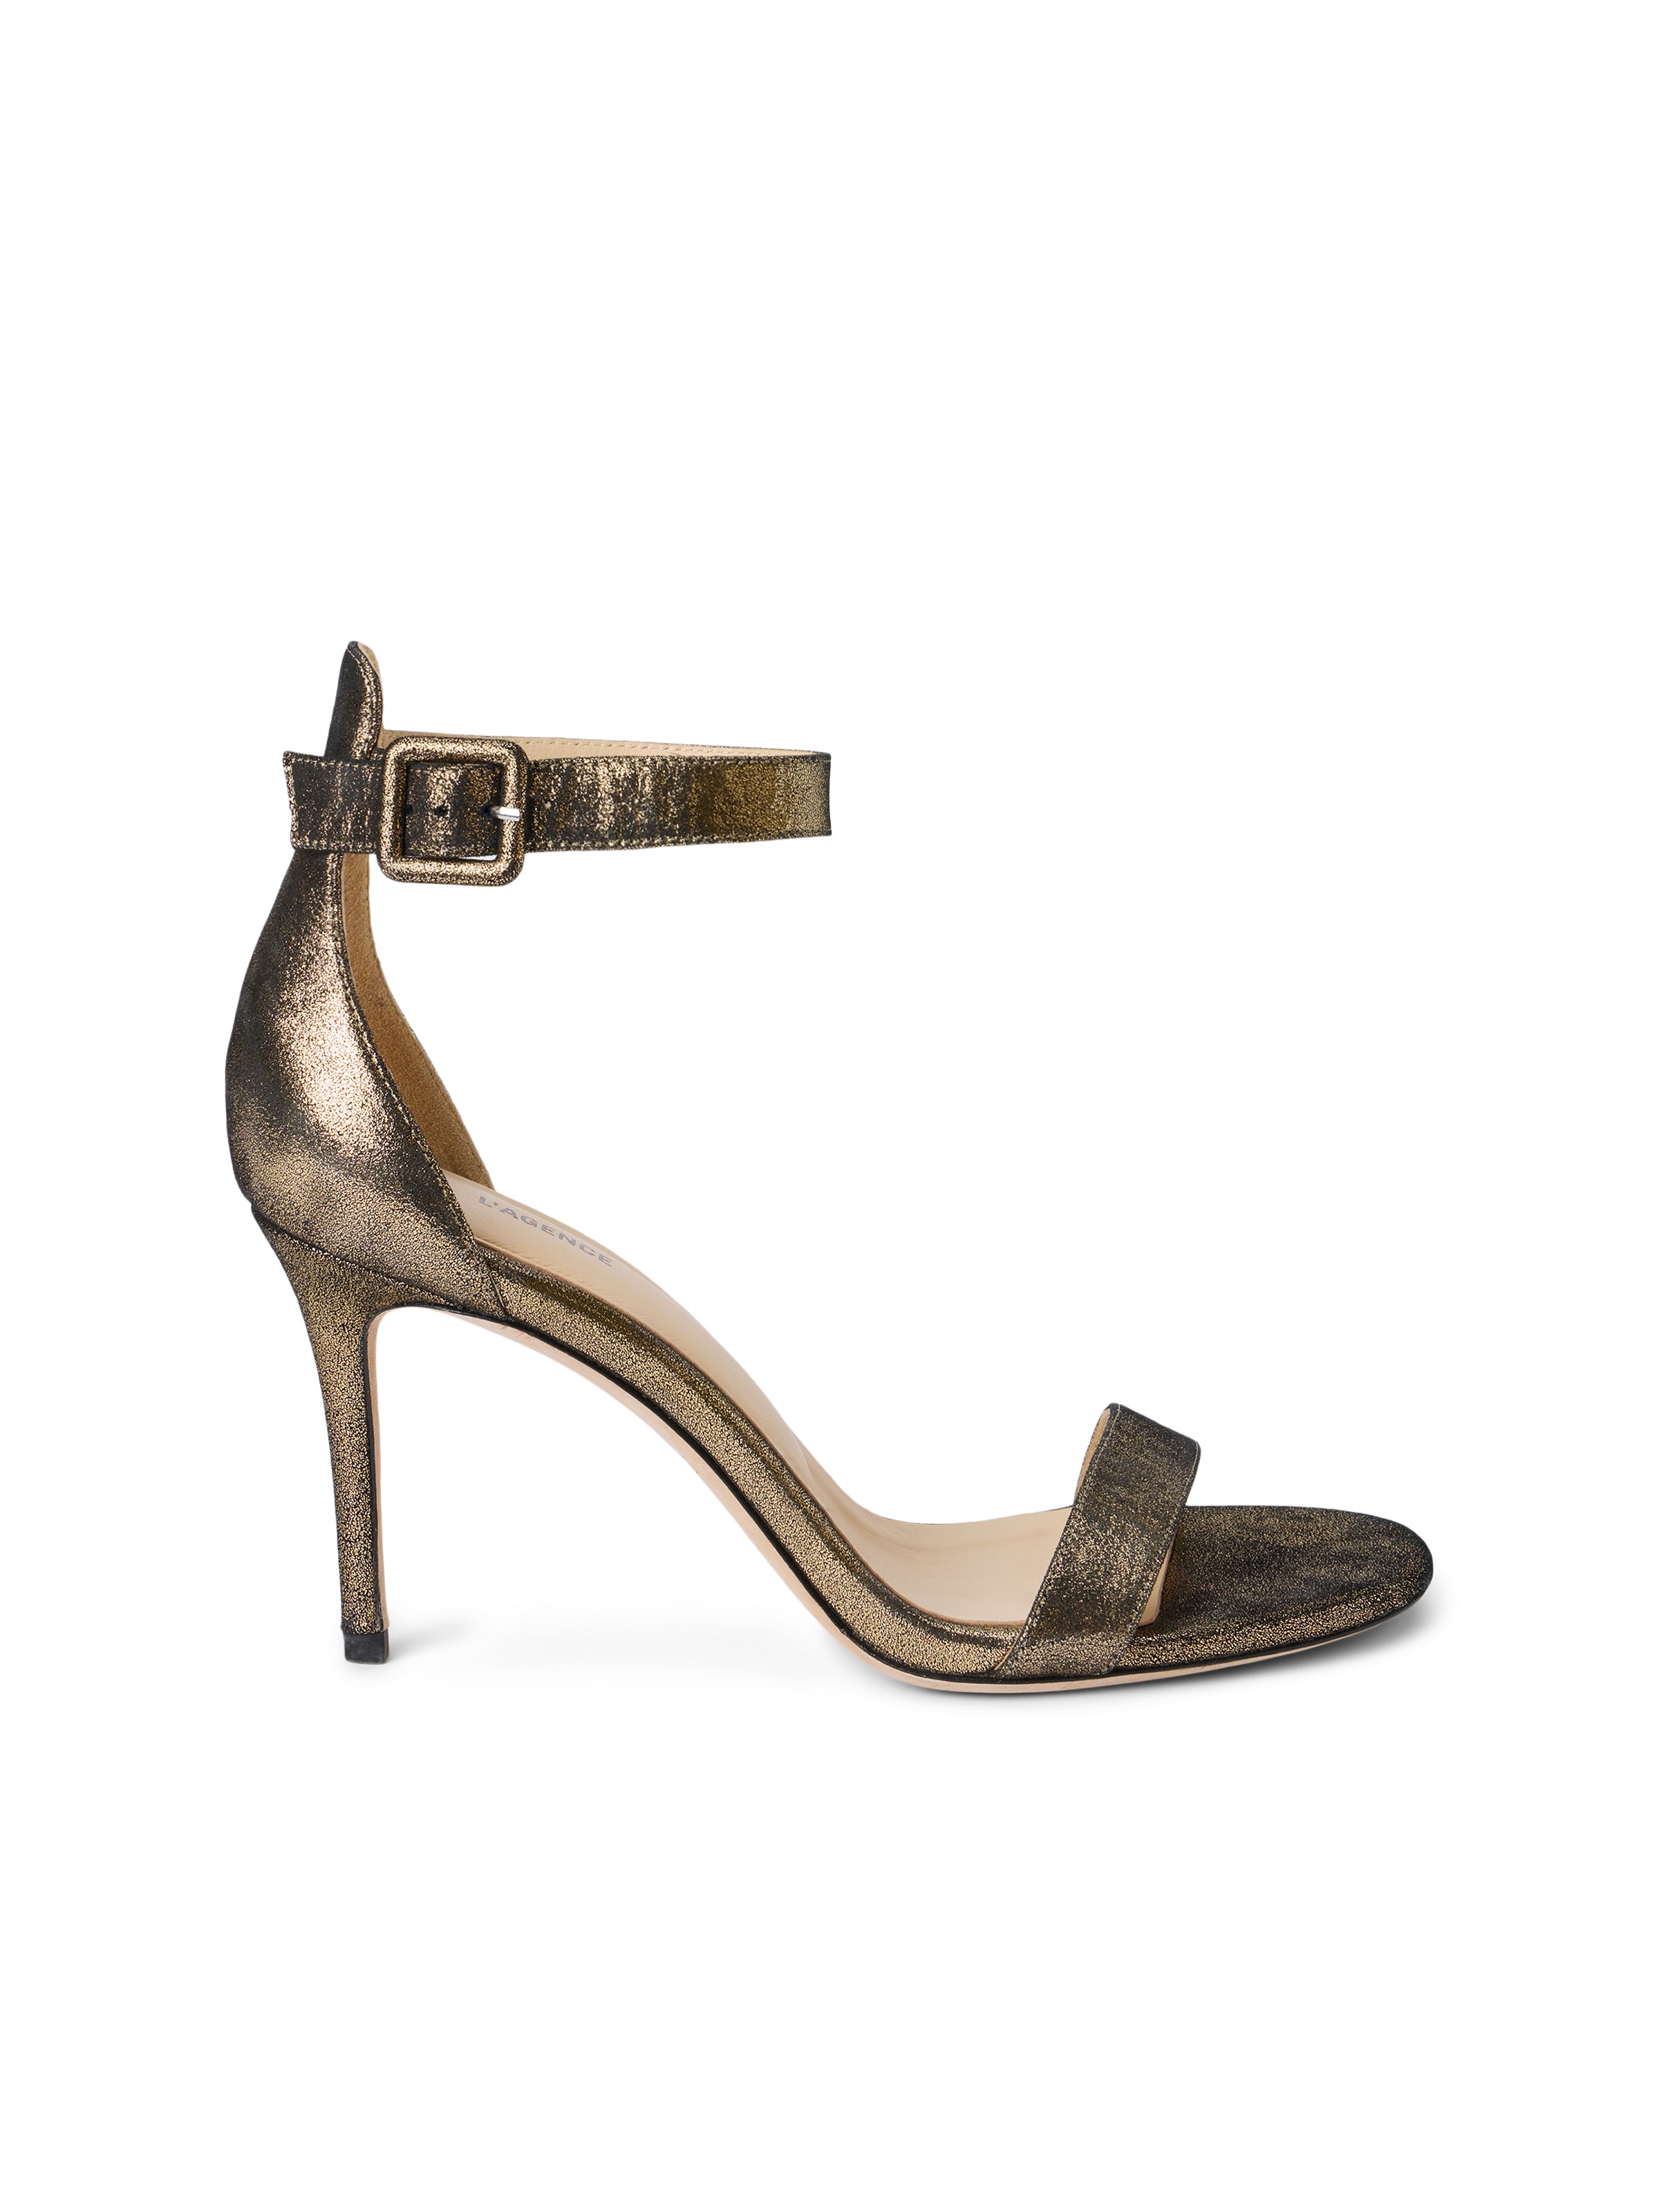 Featured: Gisele Suede Sandal